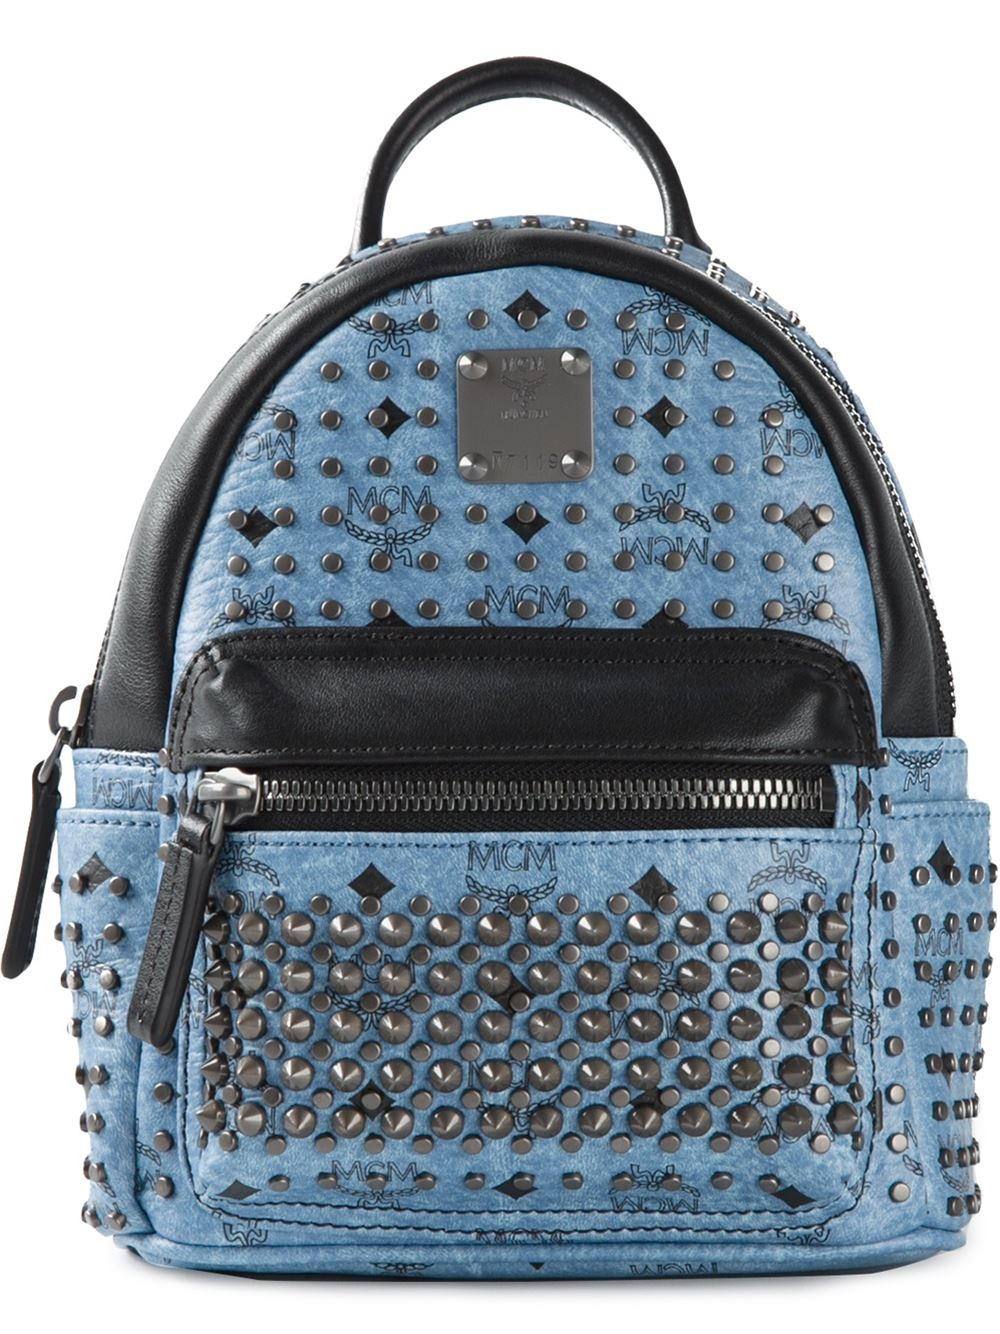 MCM Studded Mini Backpack in Blue - Lyst